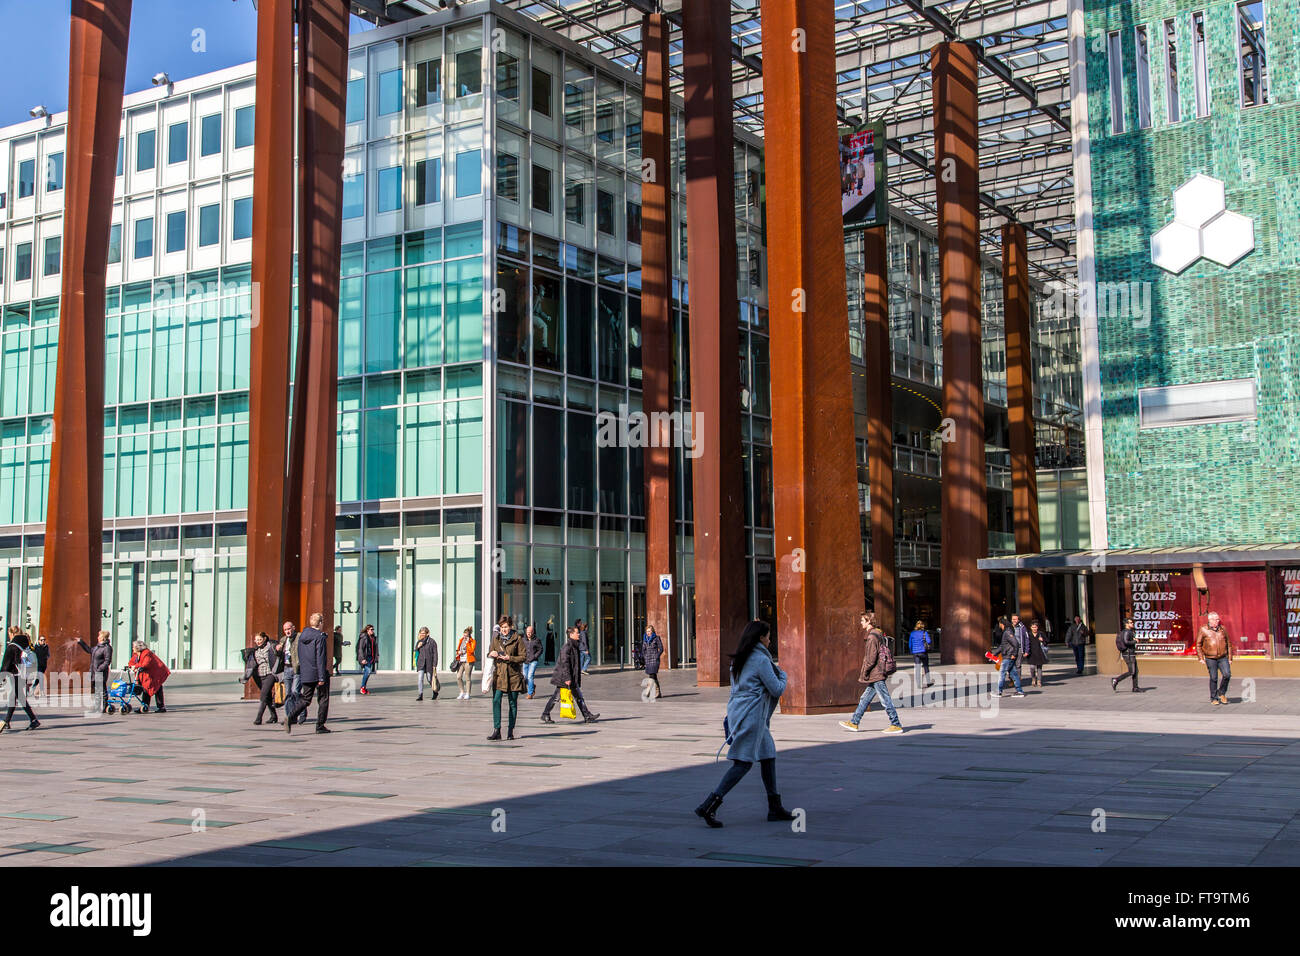 Plaza shopping mall, in the city center of Eindhoven, The Netherlands, Stock Photo